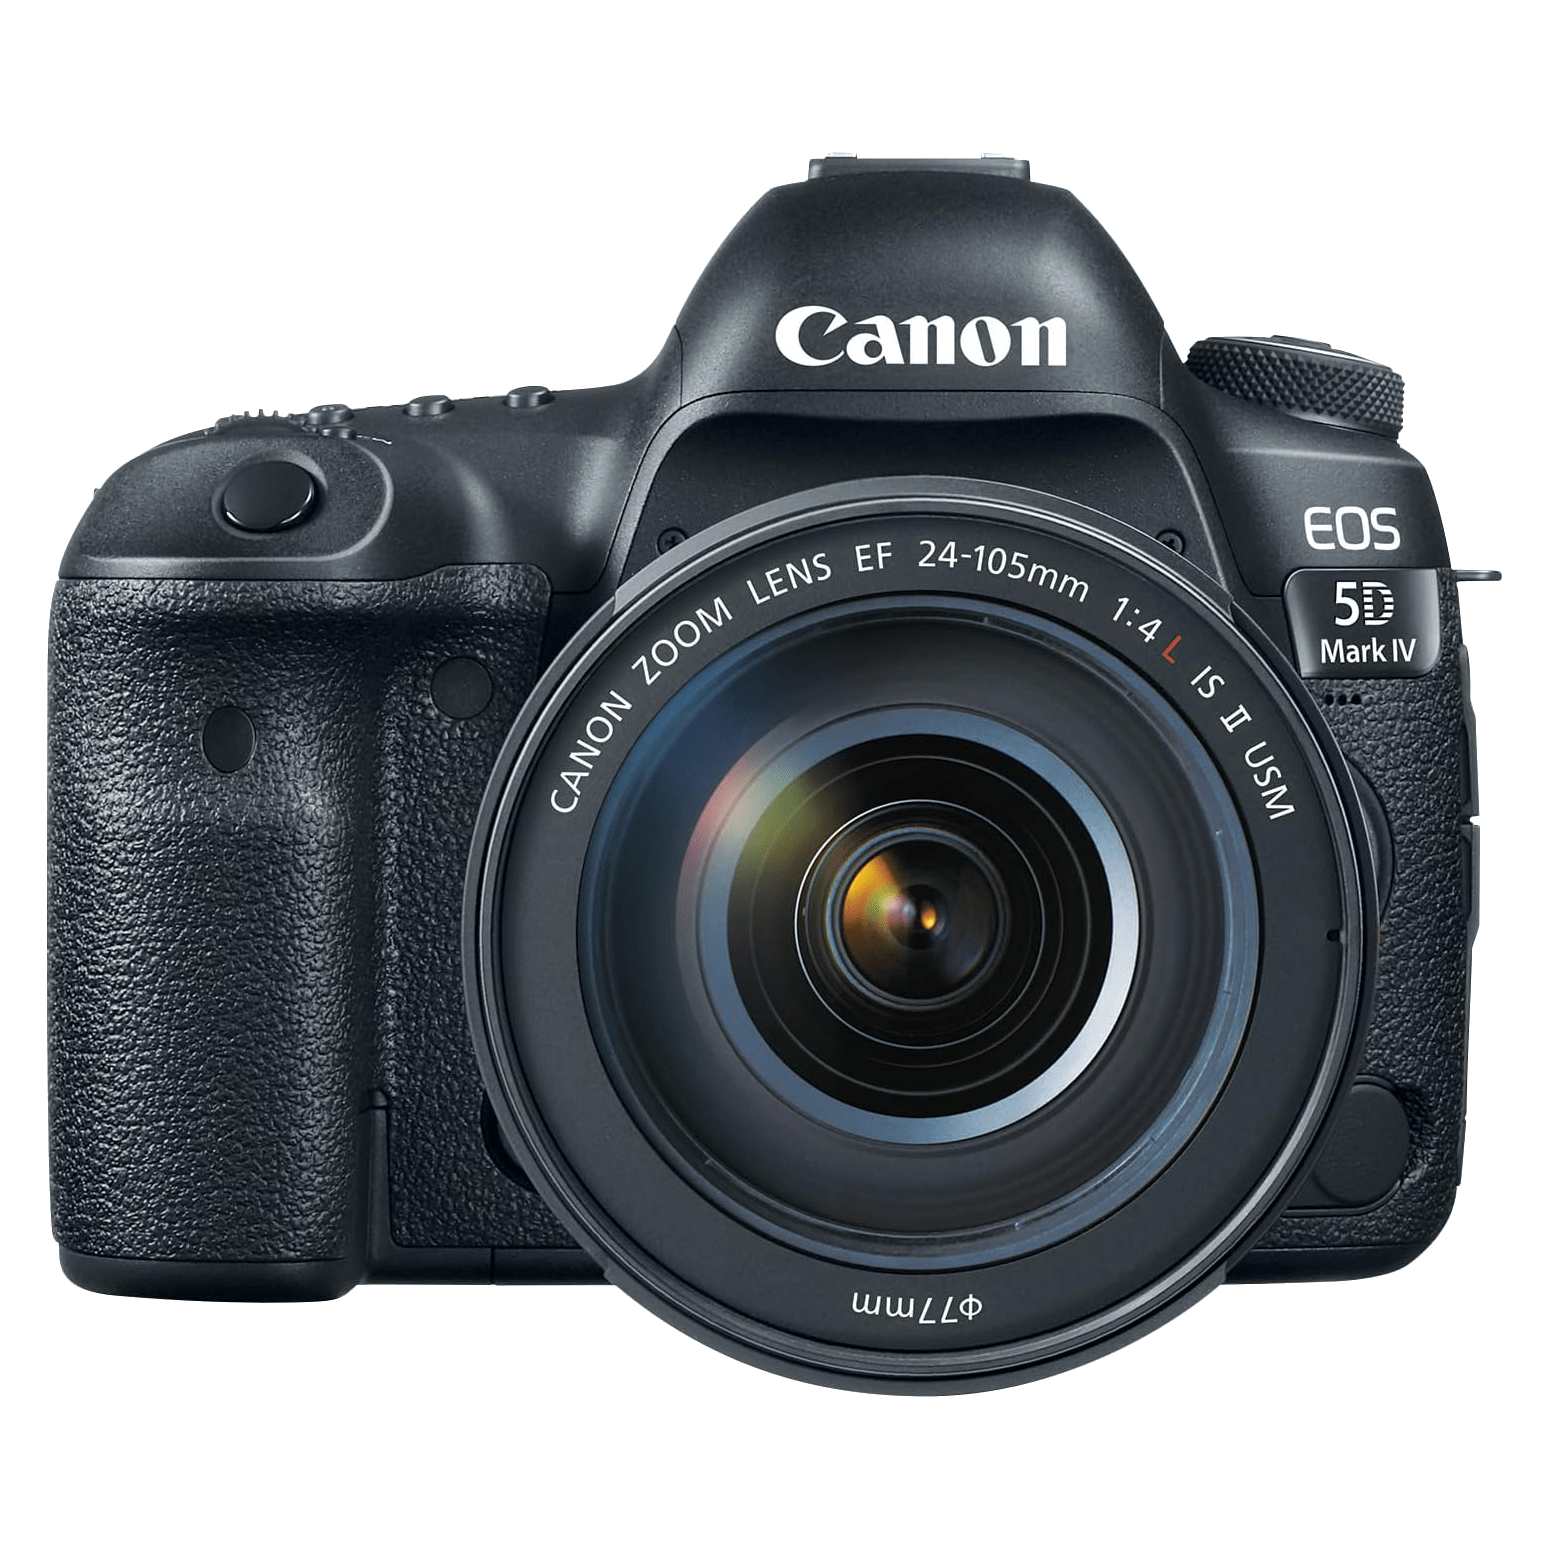 
Canon EOS Rebel T7 DSLR Camera with 18-55mm Lens Built-in Wi-Fi 24.1 MP CMOS Sensor DIGIC 4+ Image Processor and Full HD Videos